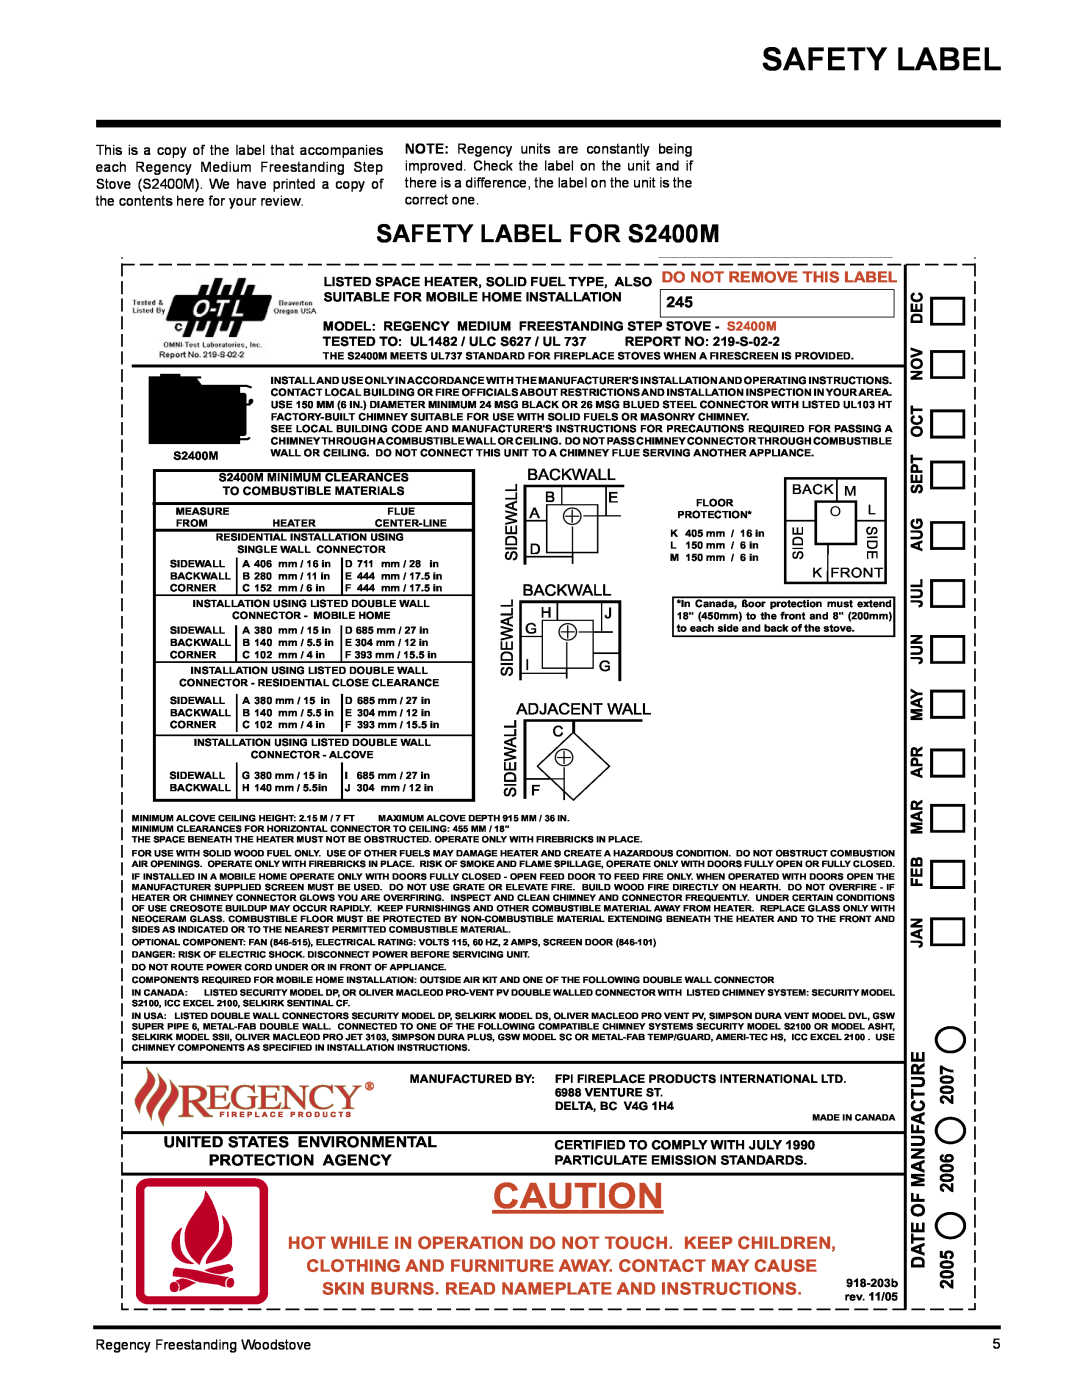 Regency Safety Label, SAFETY LABEL FOR S2400M, Clothing And Furniture Away. Contact May Cause, Of Manufacture, 2006 